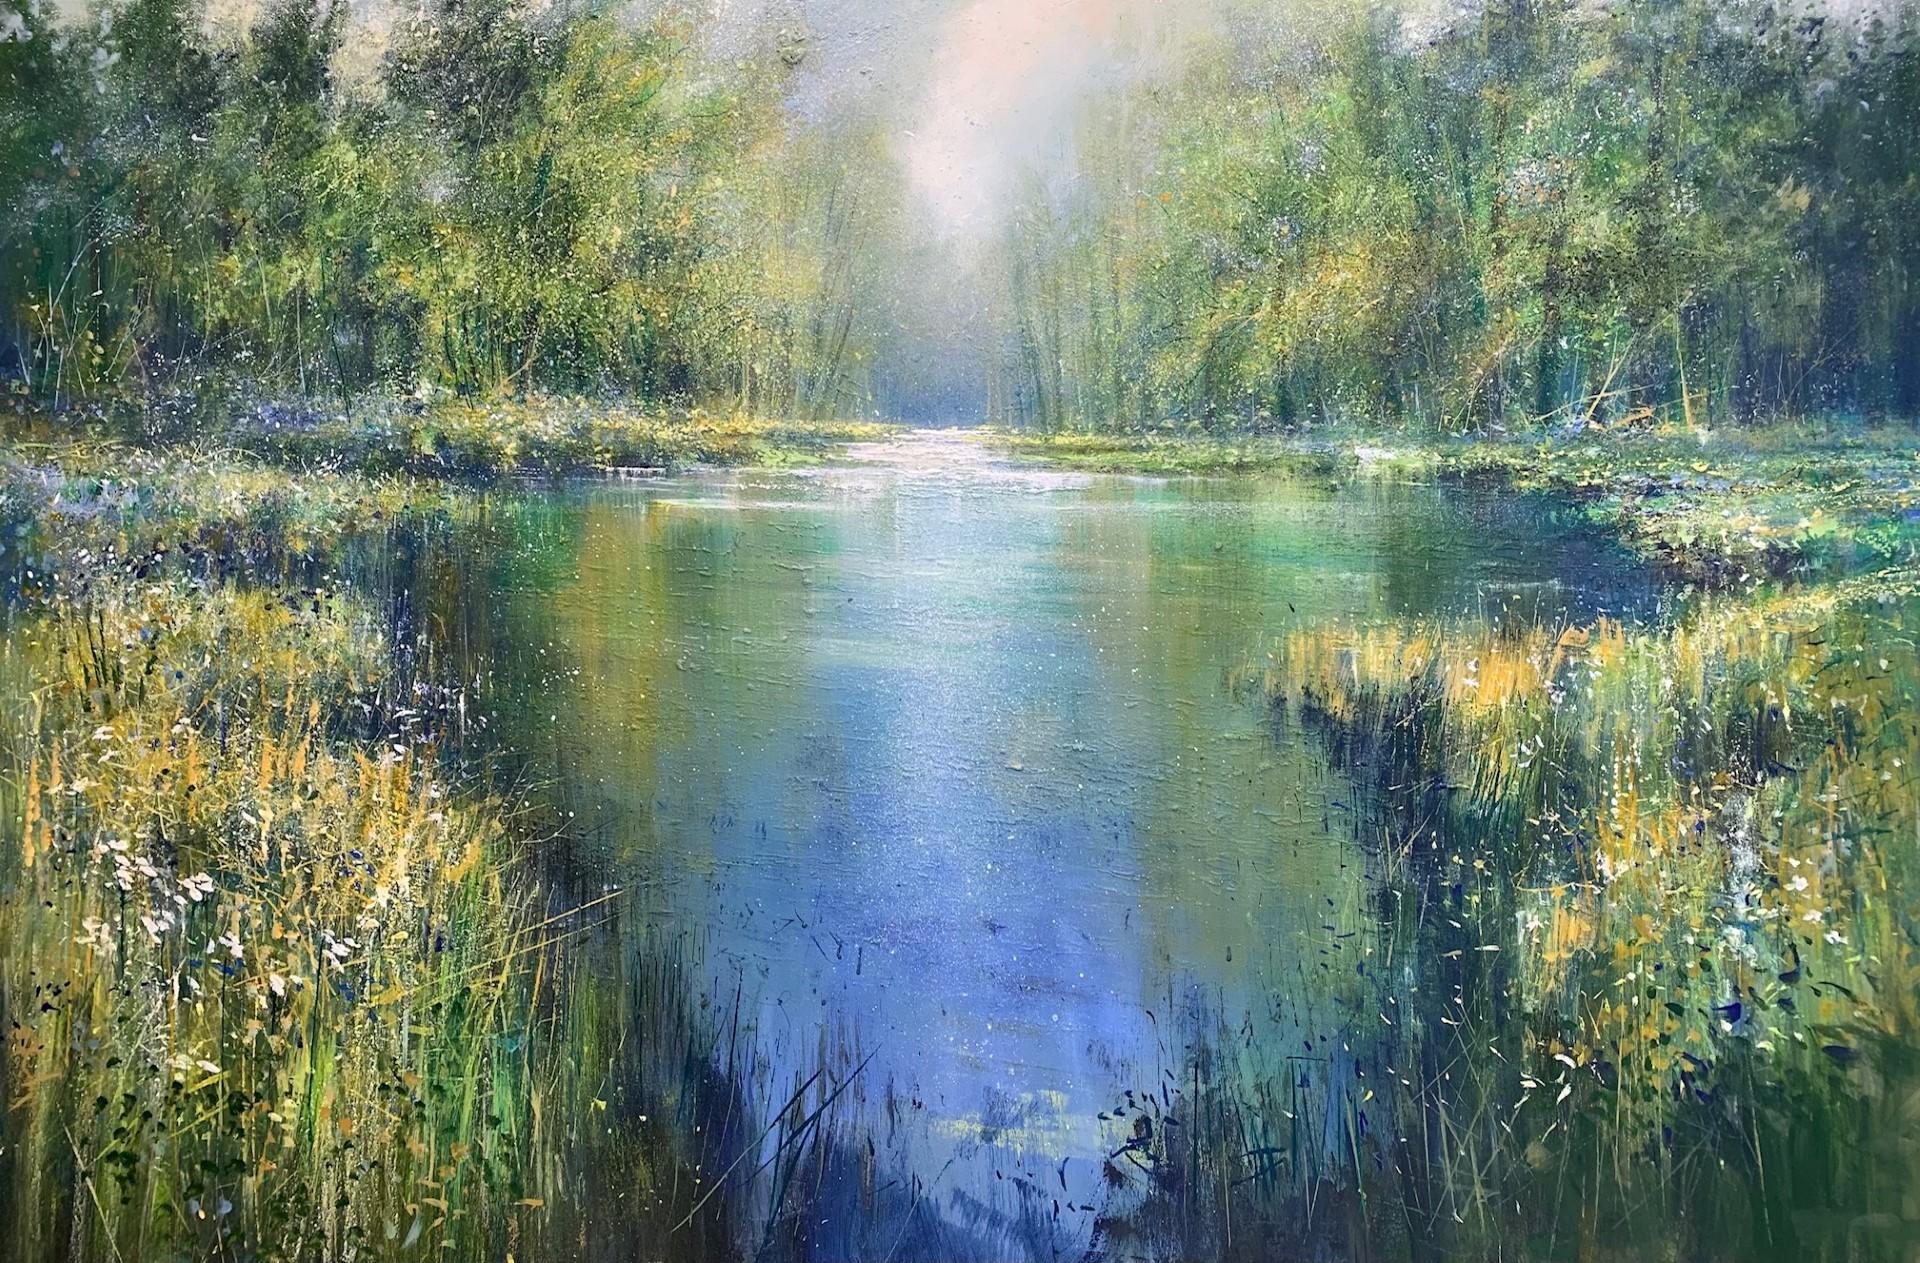 Clearing Mist on the River-original impressionism seascape painting-art for sale